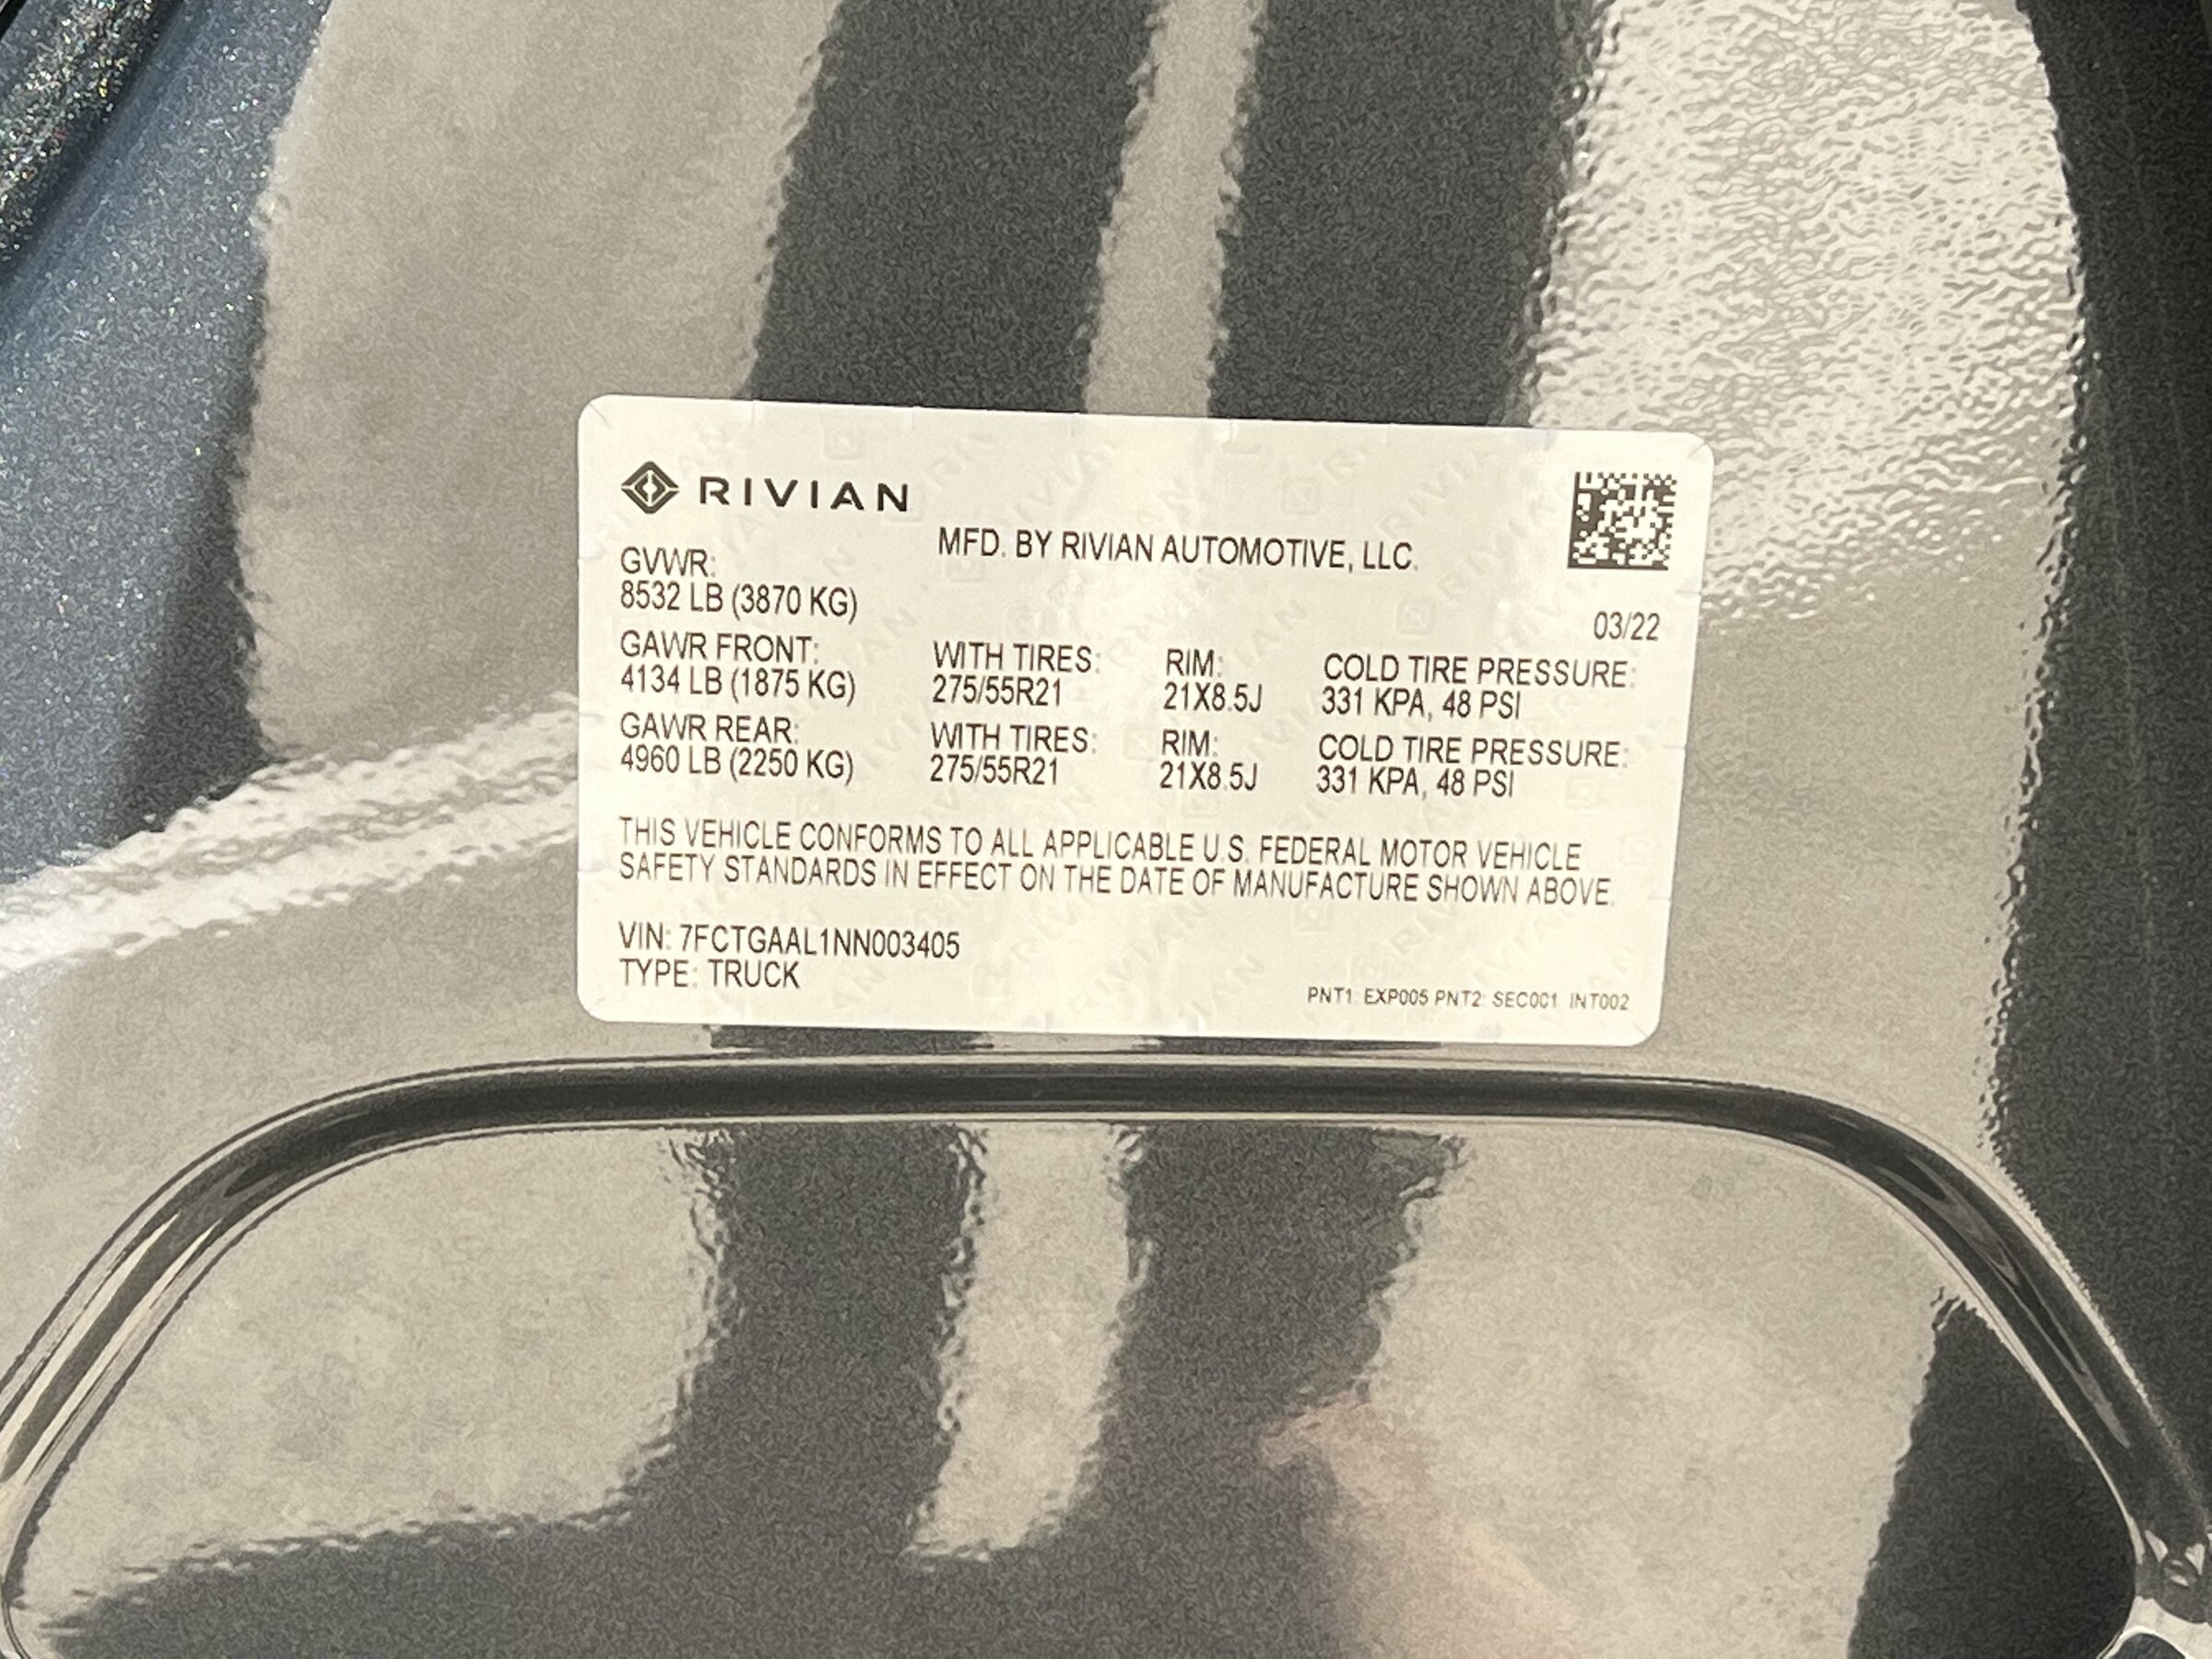 Rivian R1T R1S Forest Edge interior + other photos from Rivian Venice Hub IMG_1990